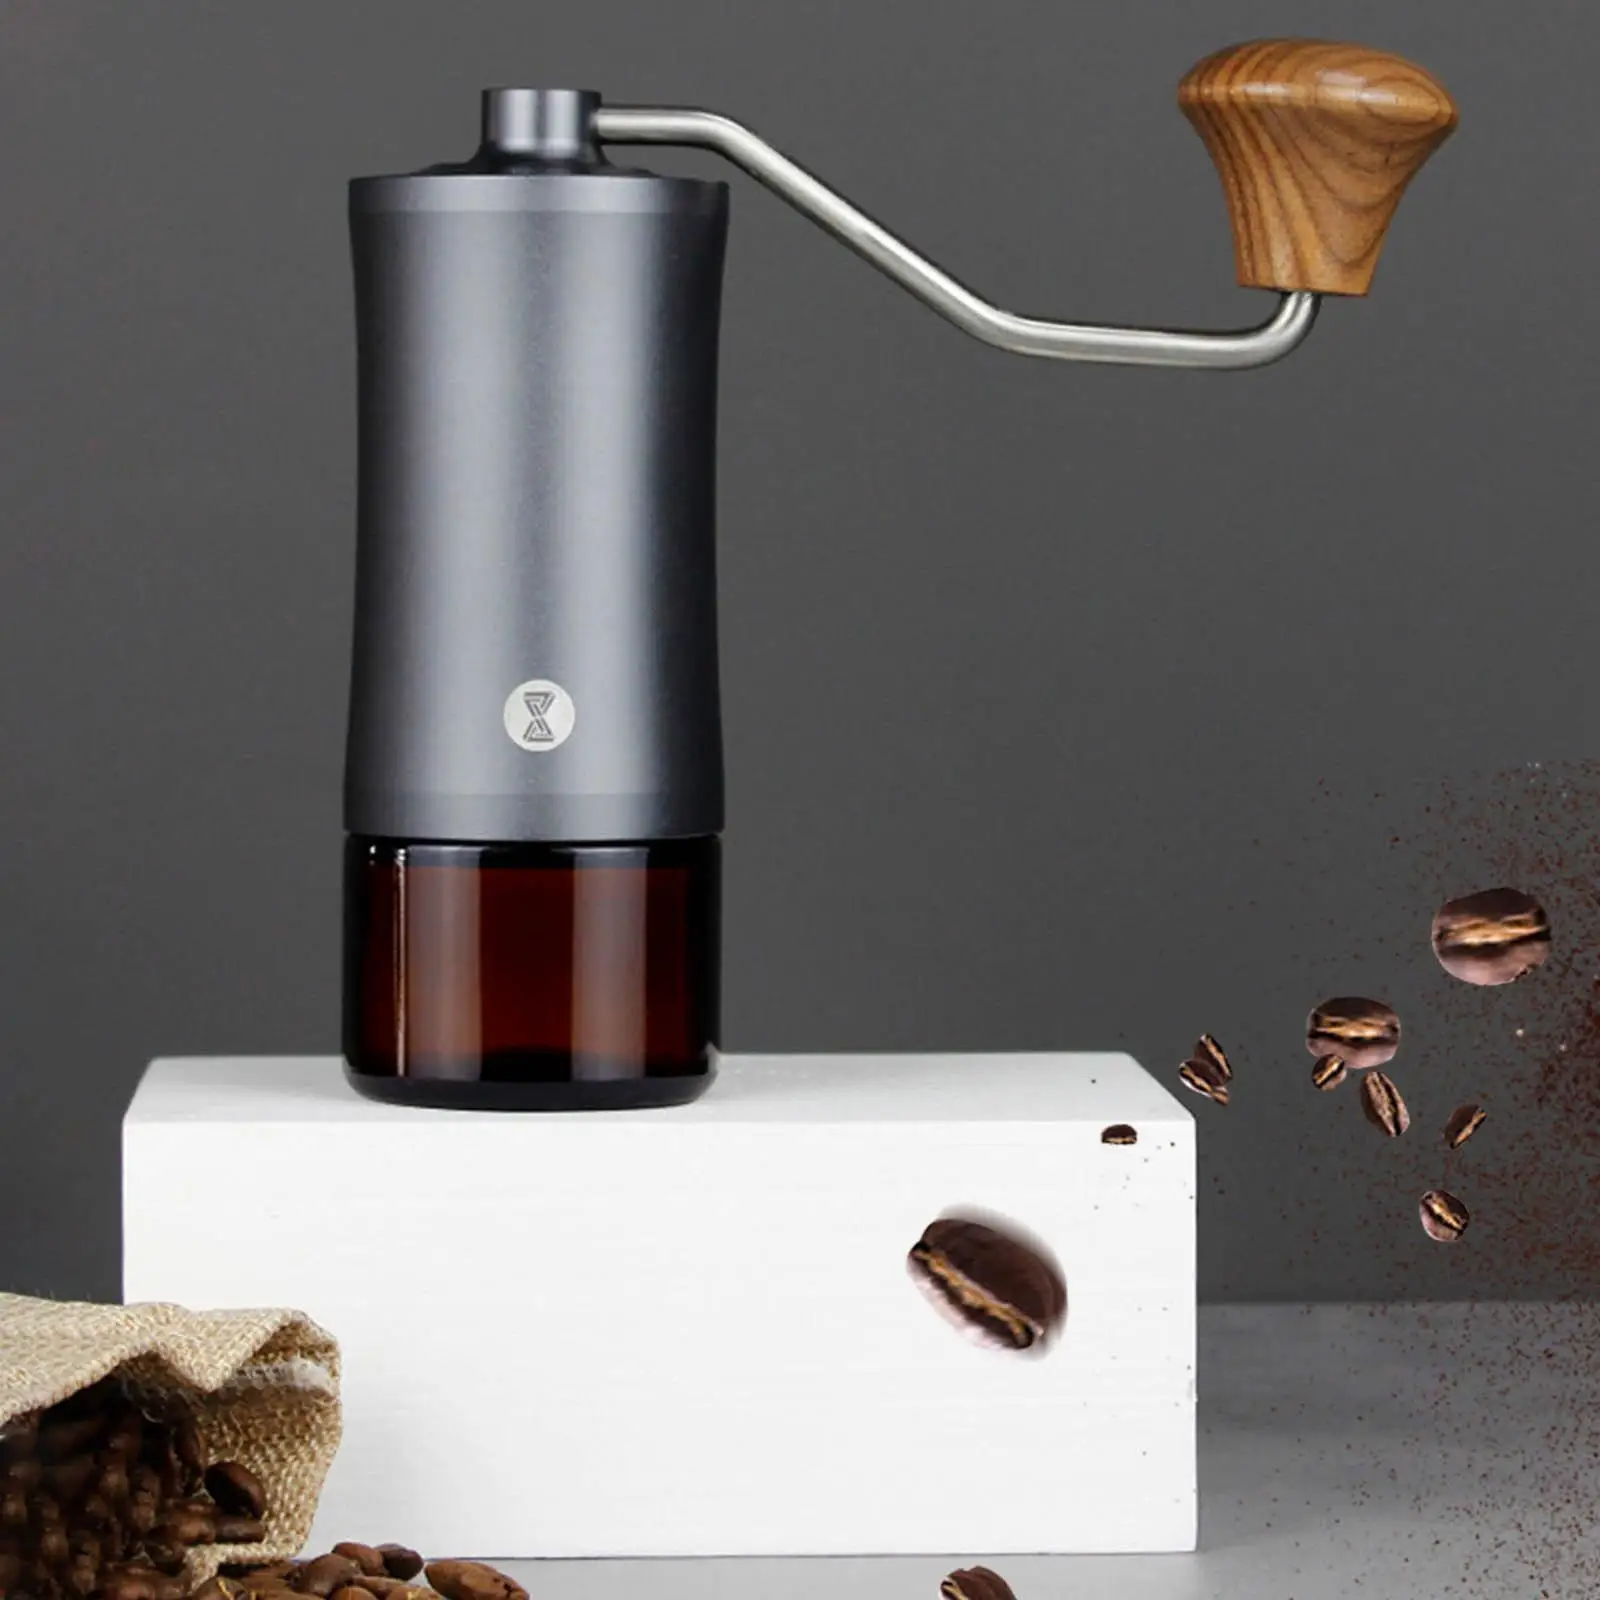 Hand Coffee Grinder Portable Coffee Mill CNC Conical Stainless Steel Burr Grinder for French Press Pour Over Kitchen Gadgets